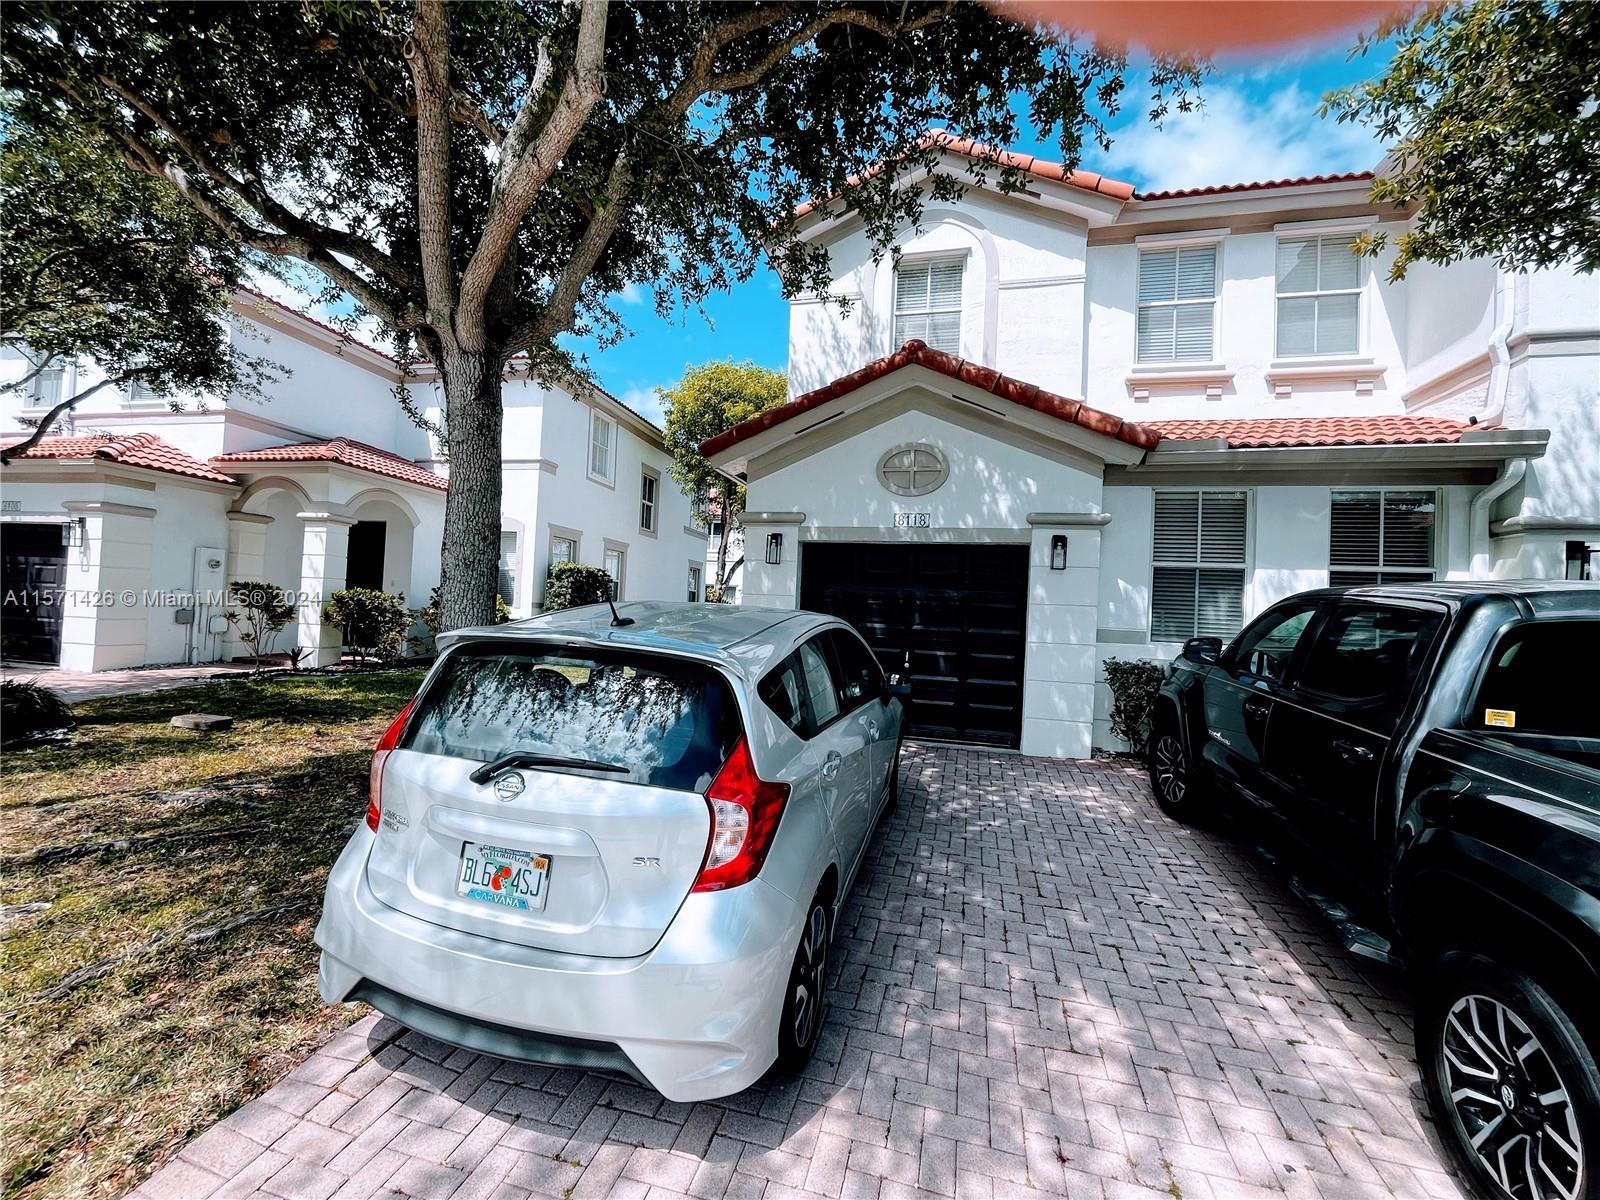 Photo of 8118 NW 108th Ct in Doral, FL